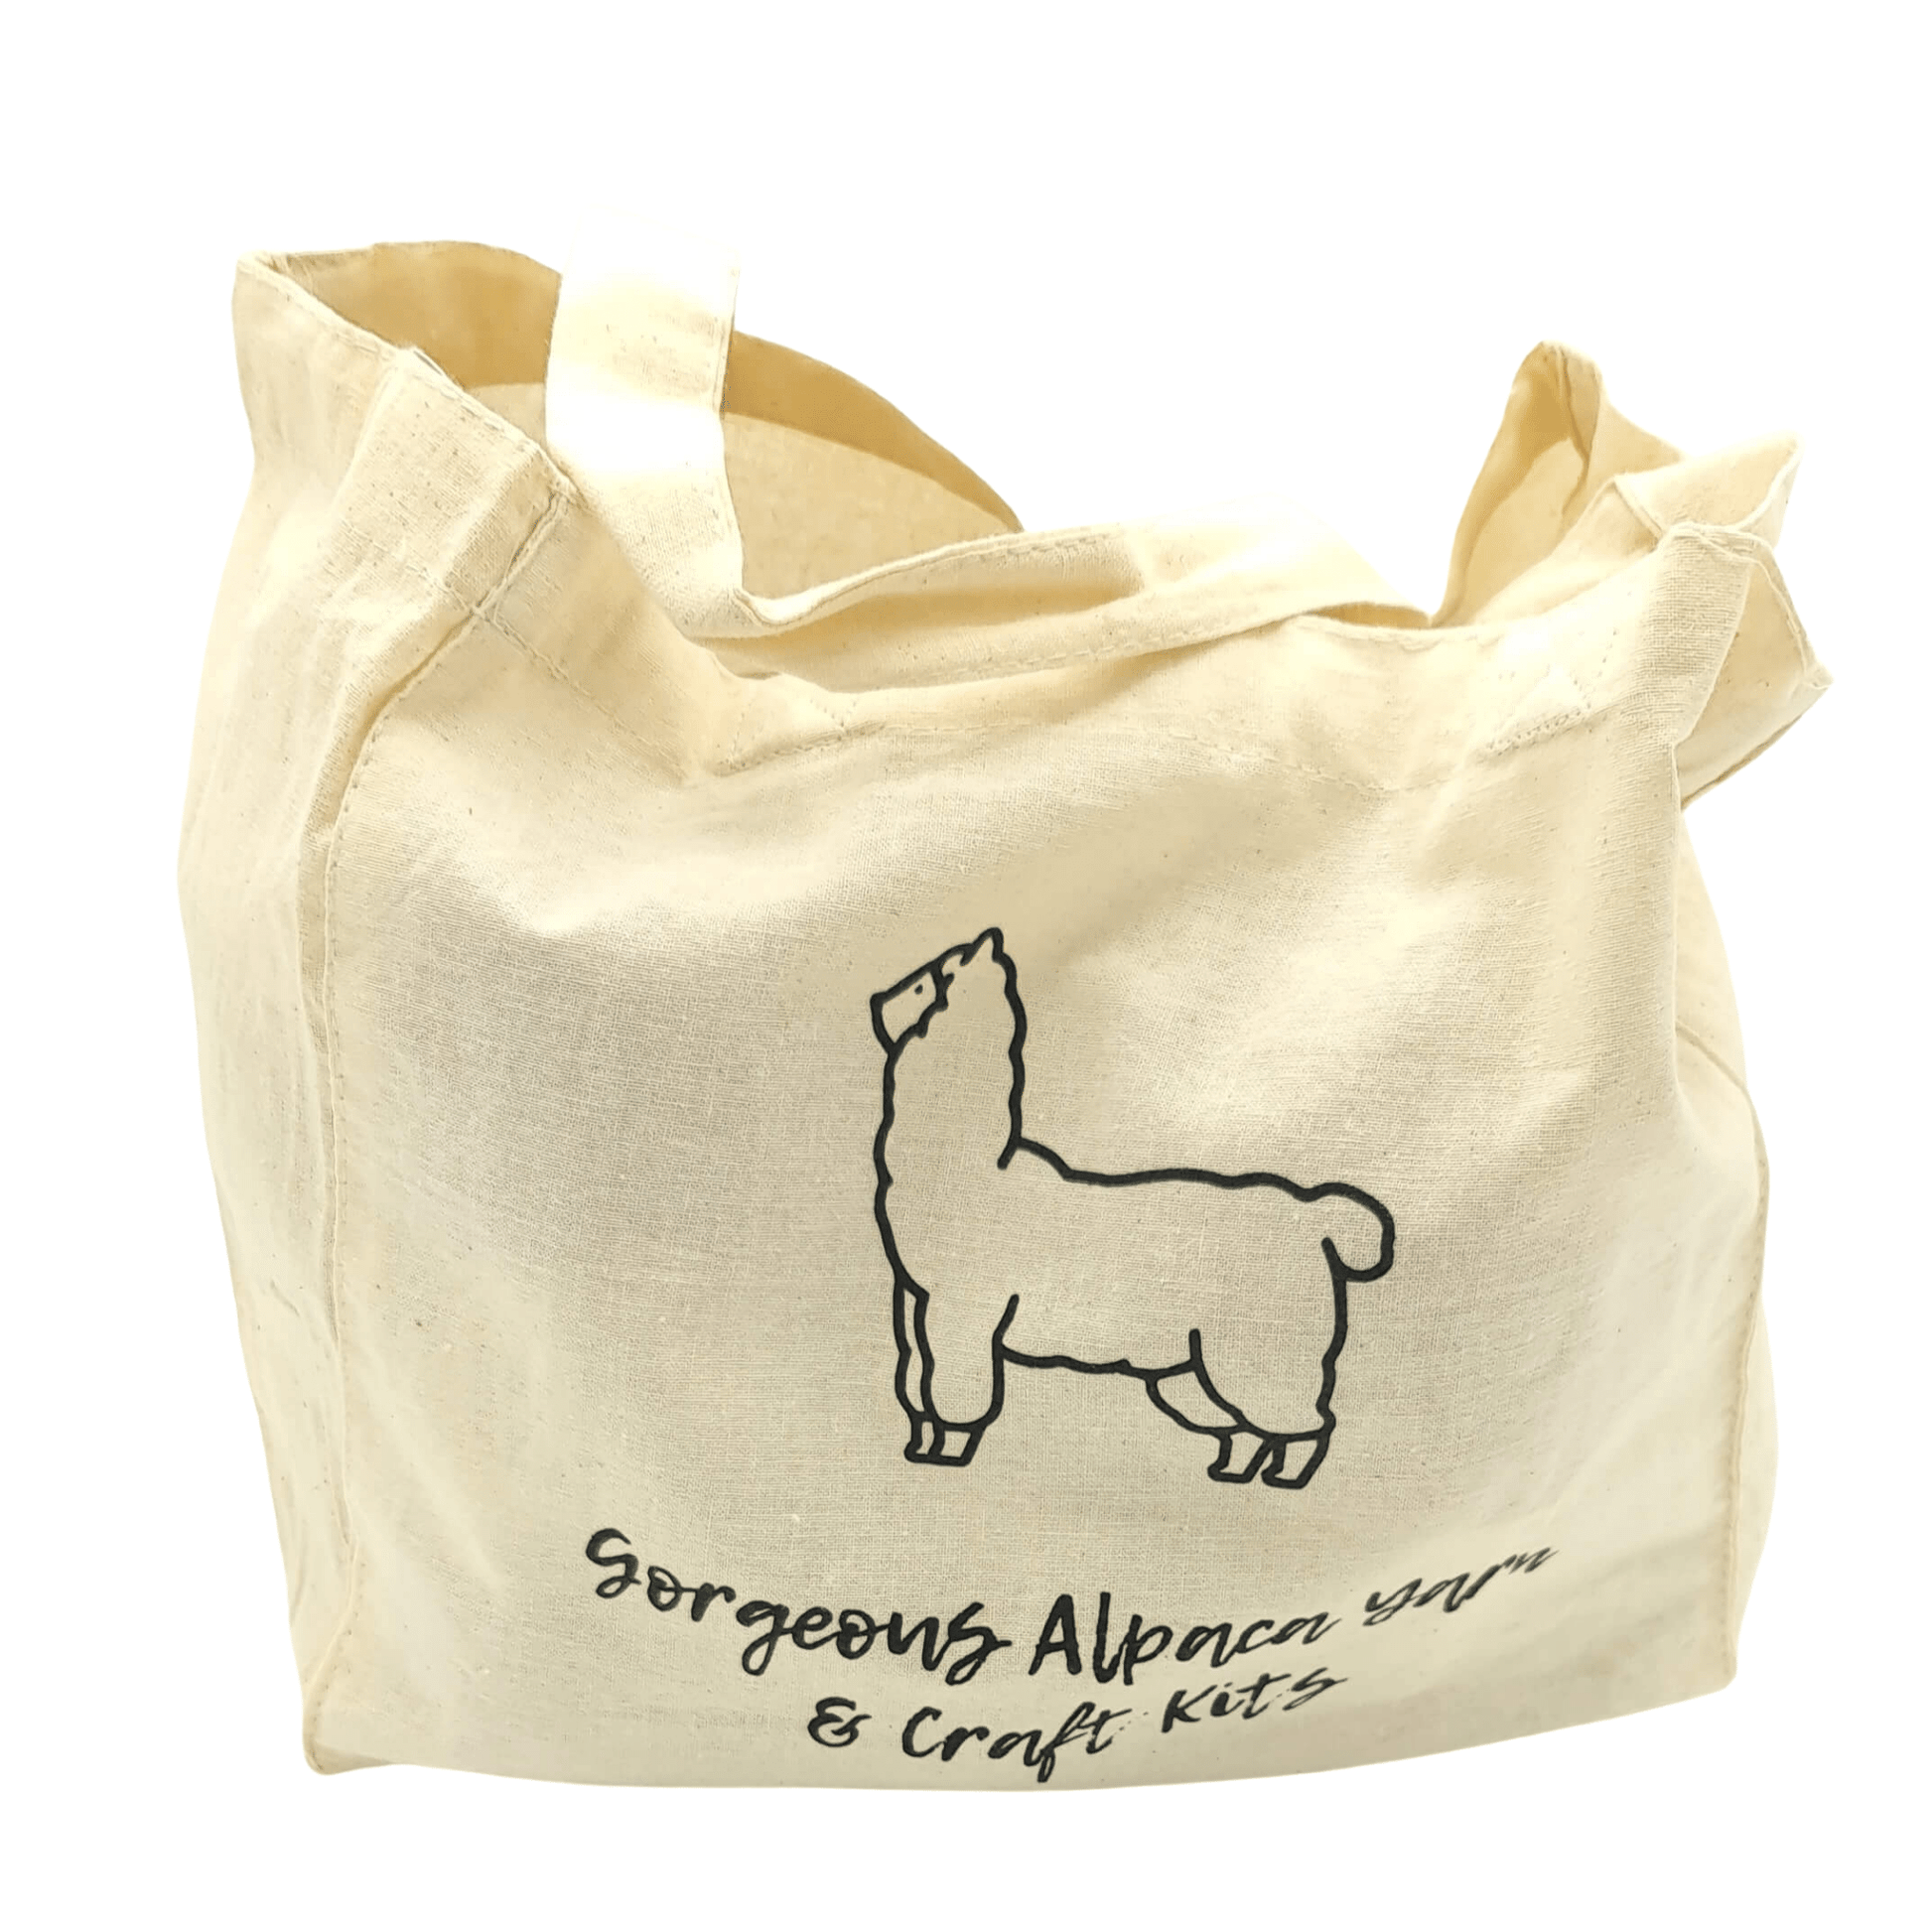 Alpaca project bag included in our knit and crochet kits